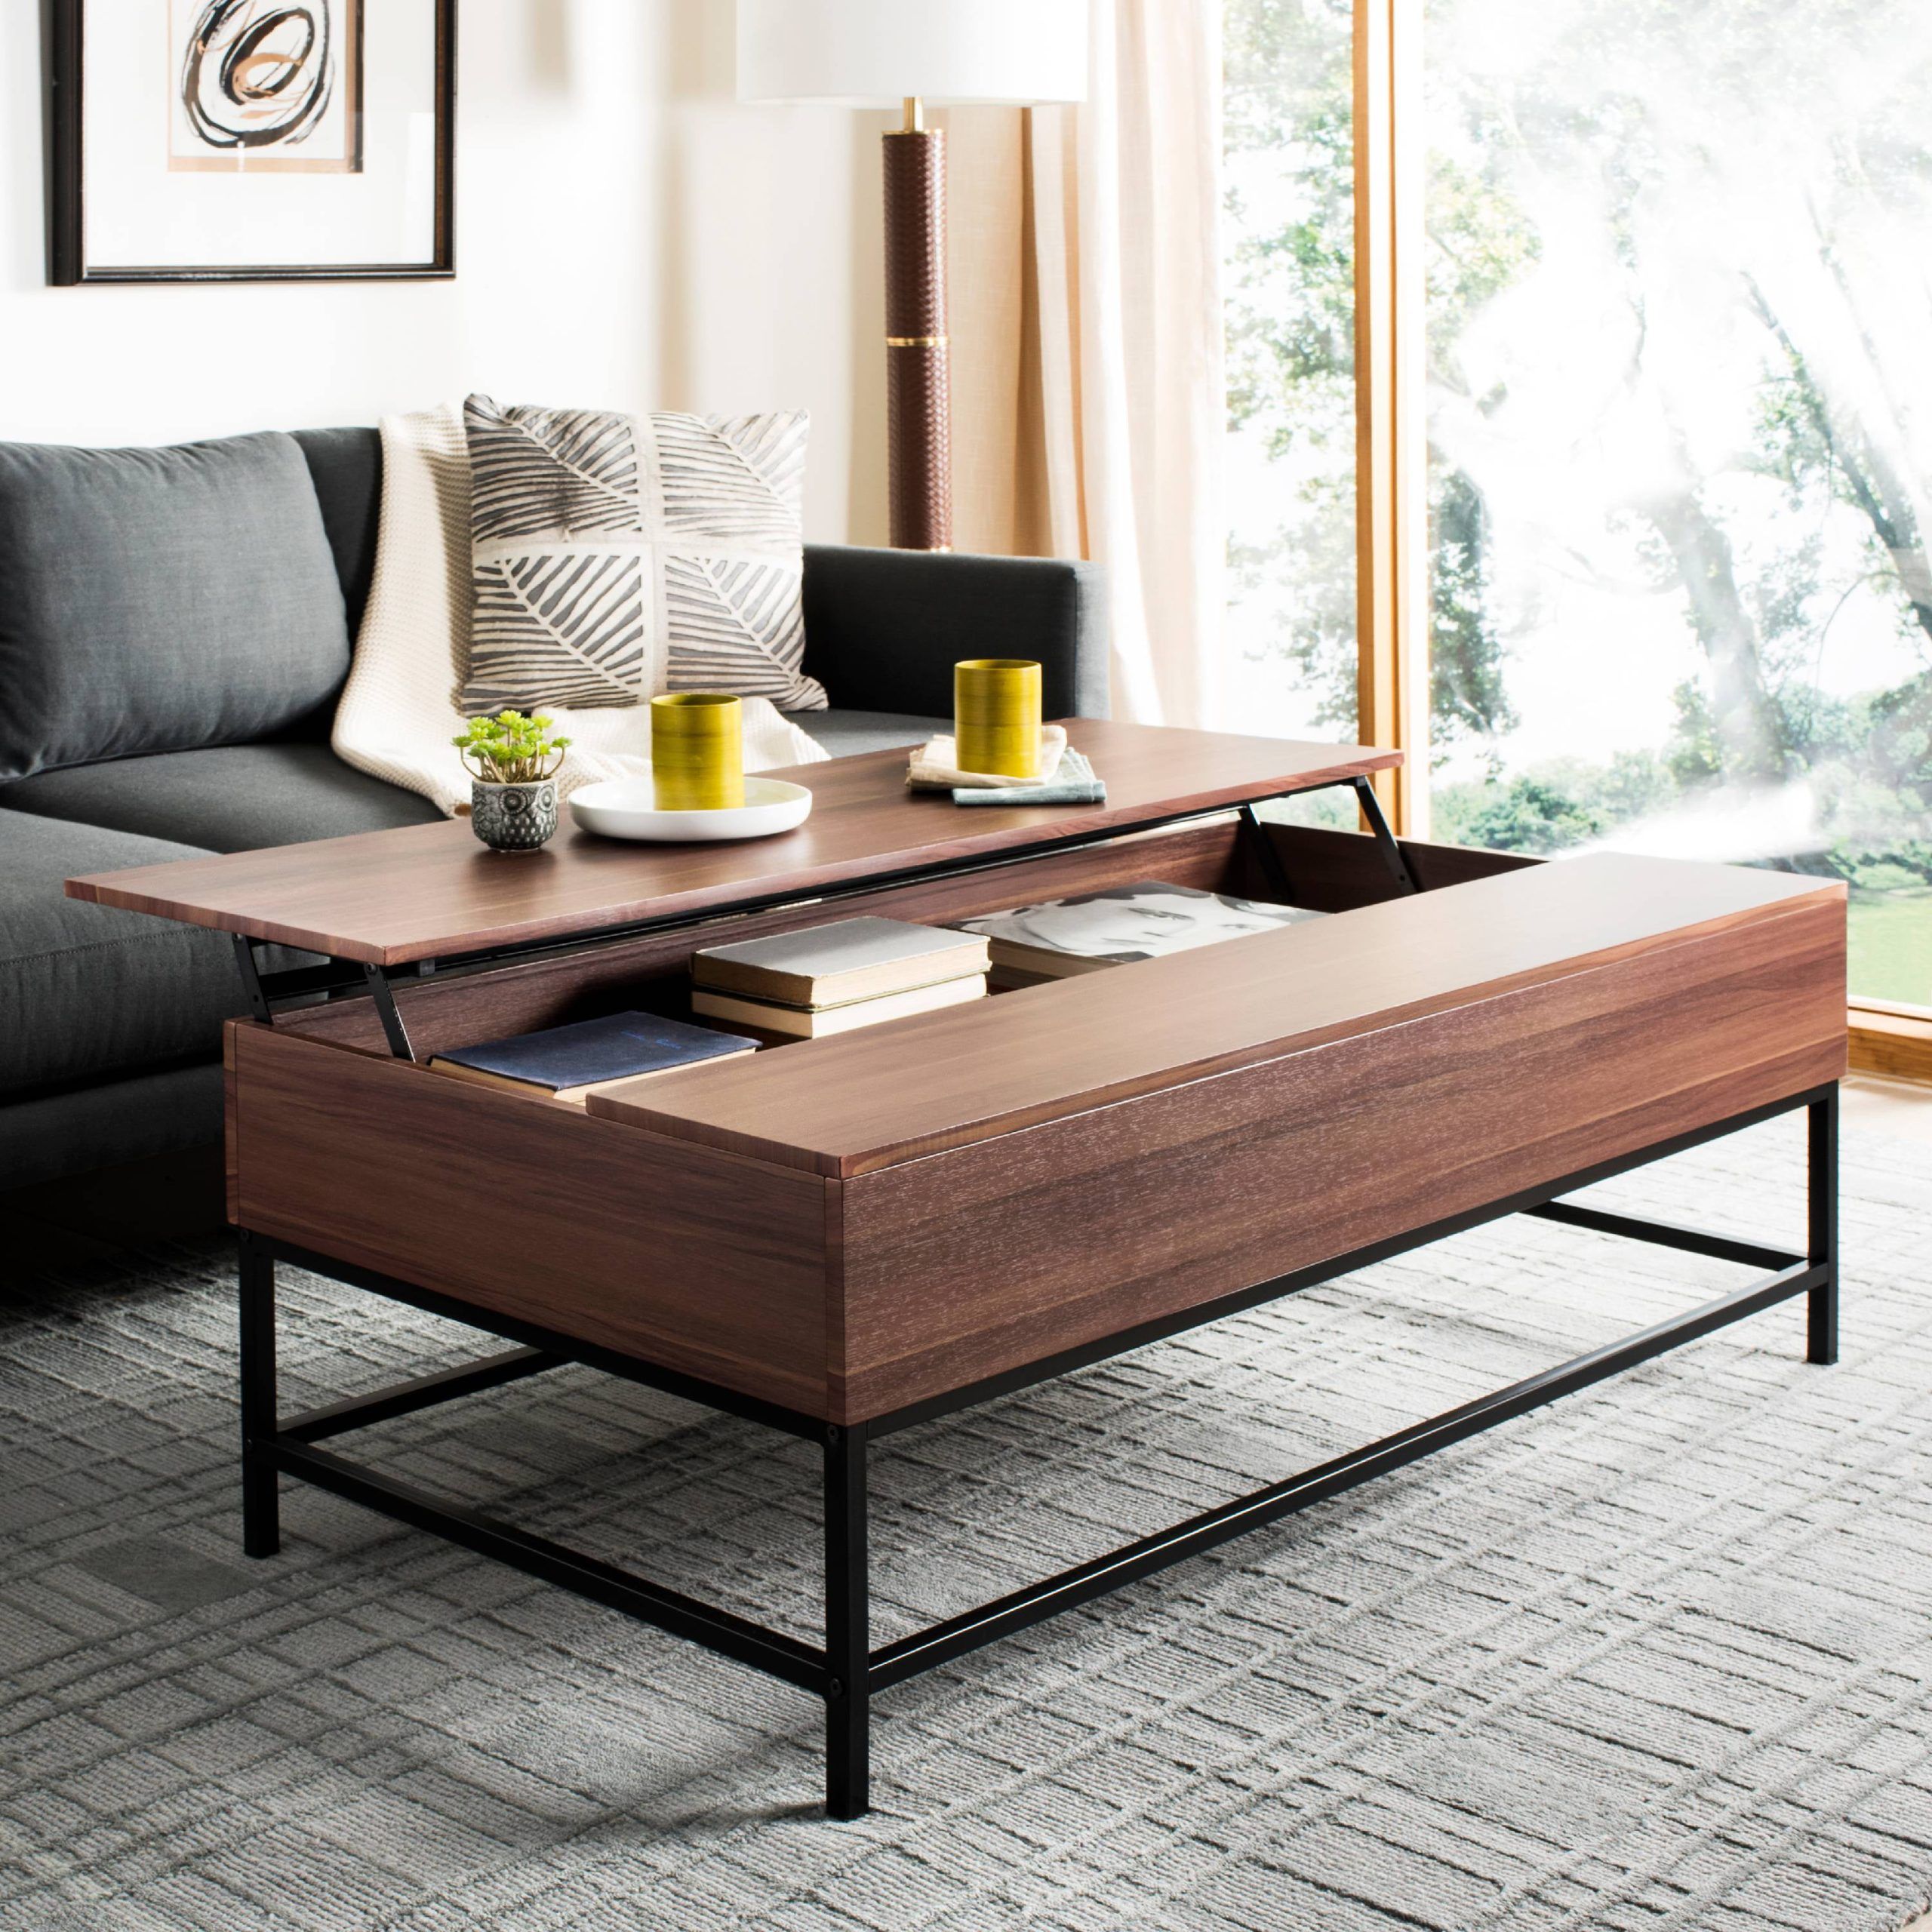 Safavieh Gina Contemporary Lift Top Coffee Table With Storage – Walmart Intended For Modern Wooden Lift Top Tables (Gallery 10 of 20)